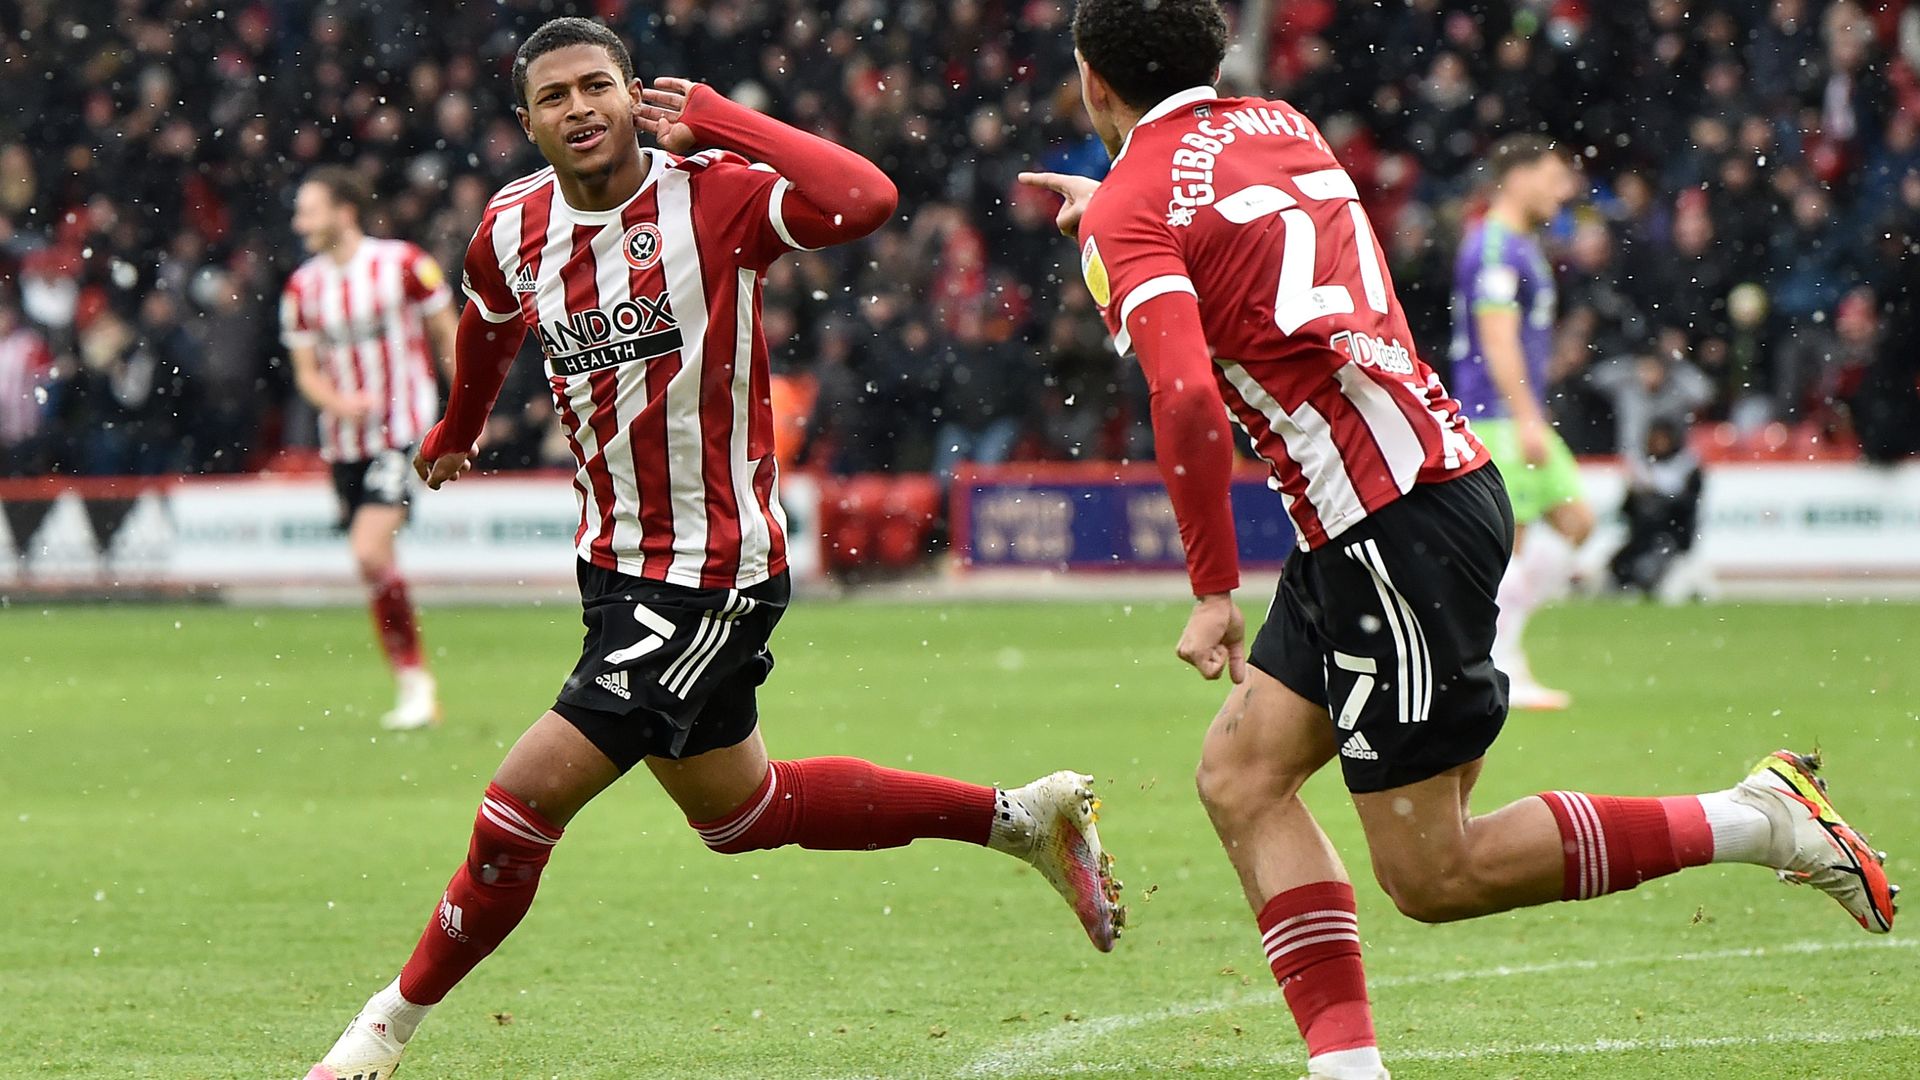 Brewster and Sharp fire Sheff Utd to victory